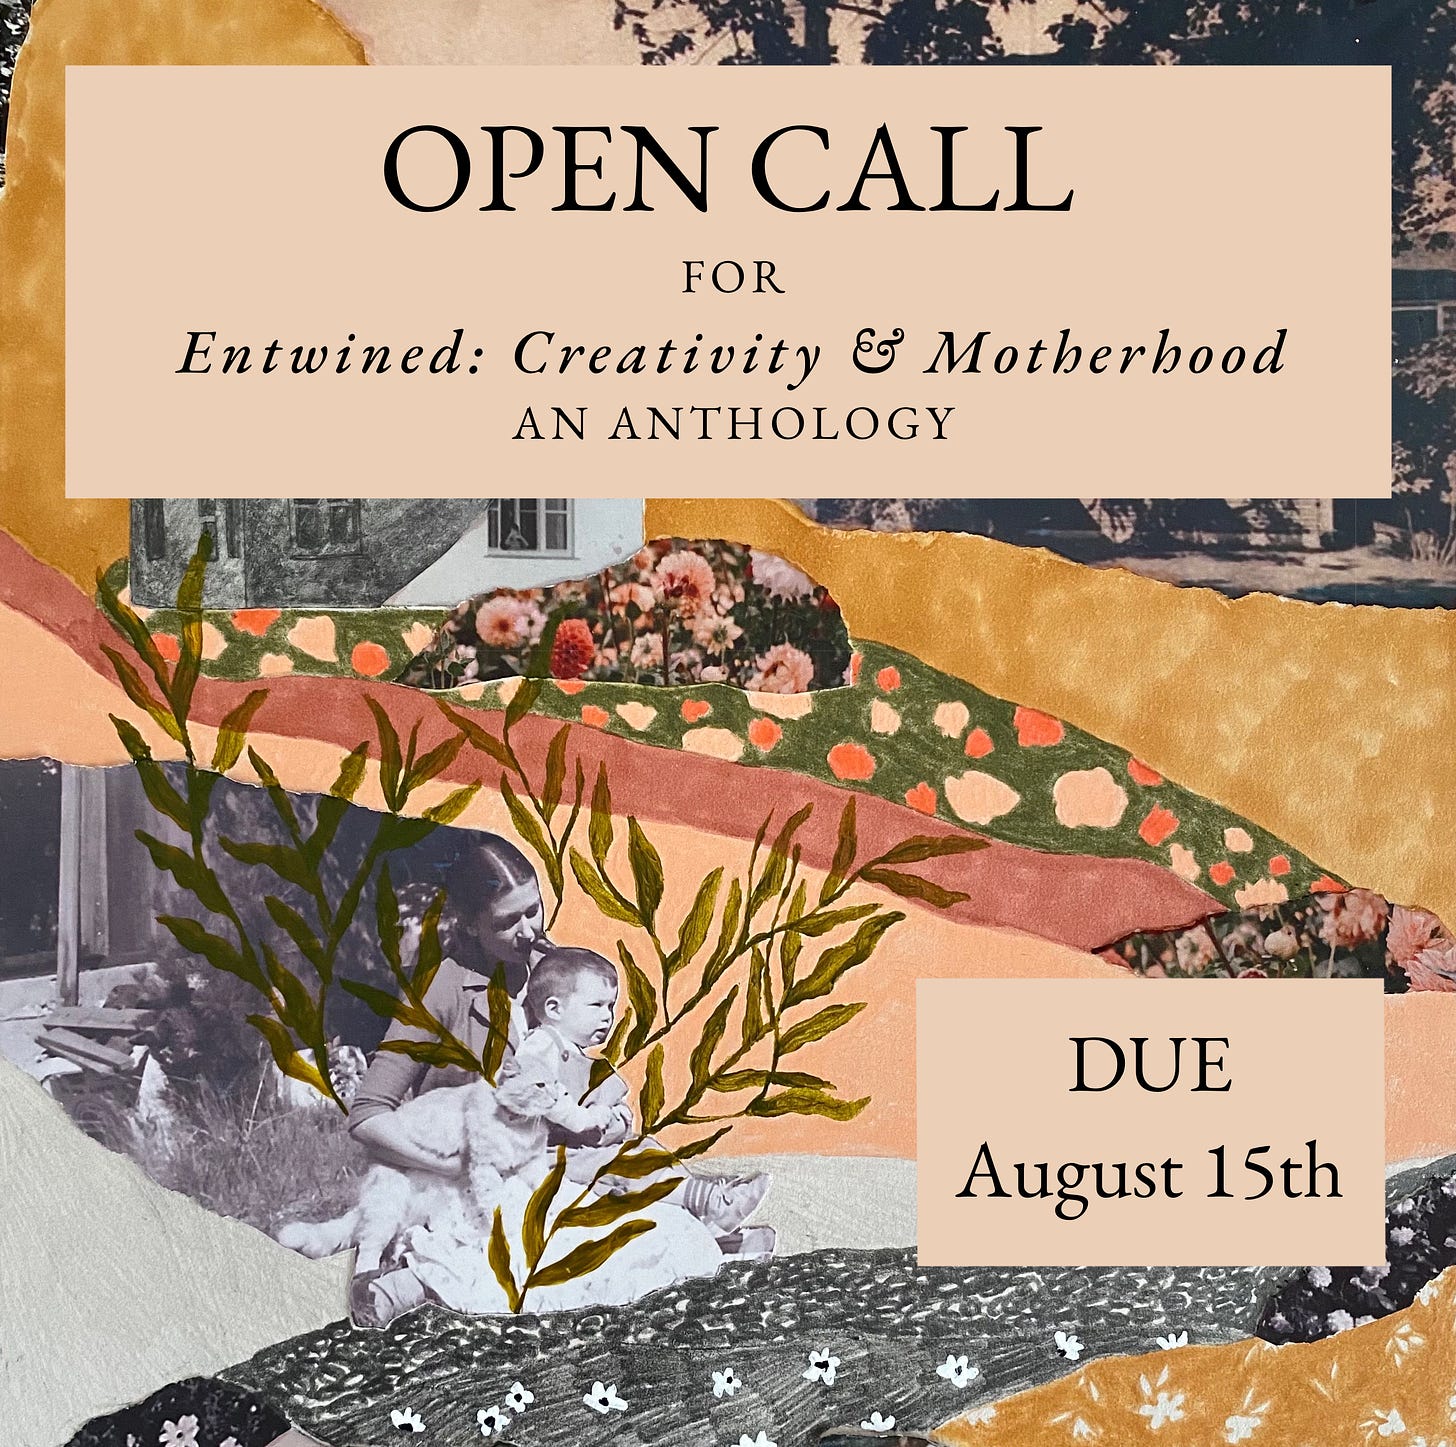 "OPEN CALL FOR Entwined: Creativity & Motherhood AN ANTHOLOGY DUE August 15th" Collage by Twiggy Boyers featuring vintage photograph of mother and child with hand painted vines. Background is torn layers of gold, florals, old house photos, and pinks.